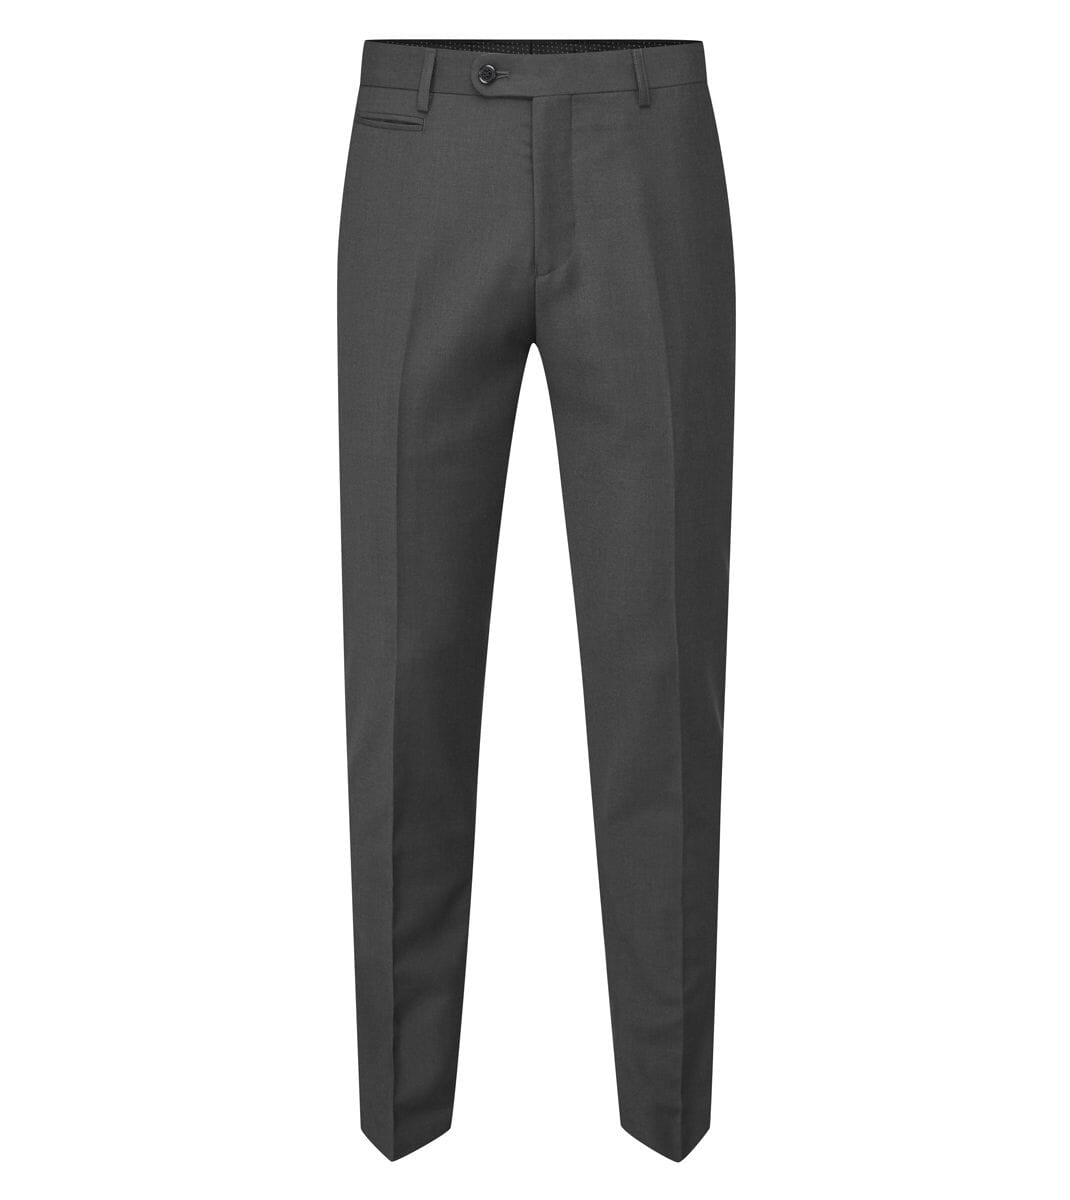 Madrid Charcoal Trousers - DUE 4/9/23 - Trousers - - THREADPEPPER